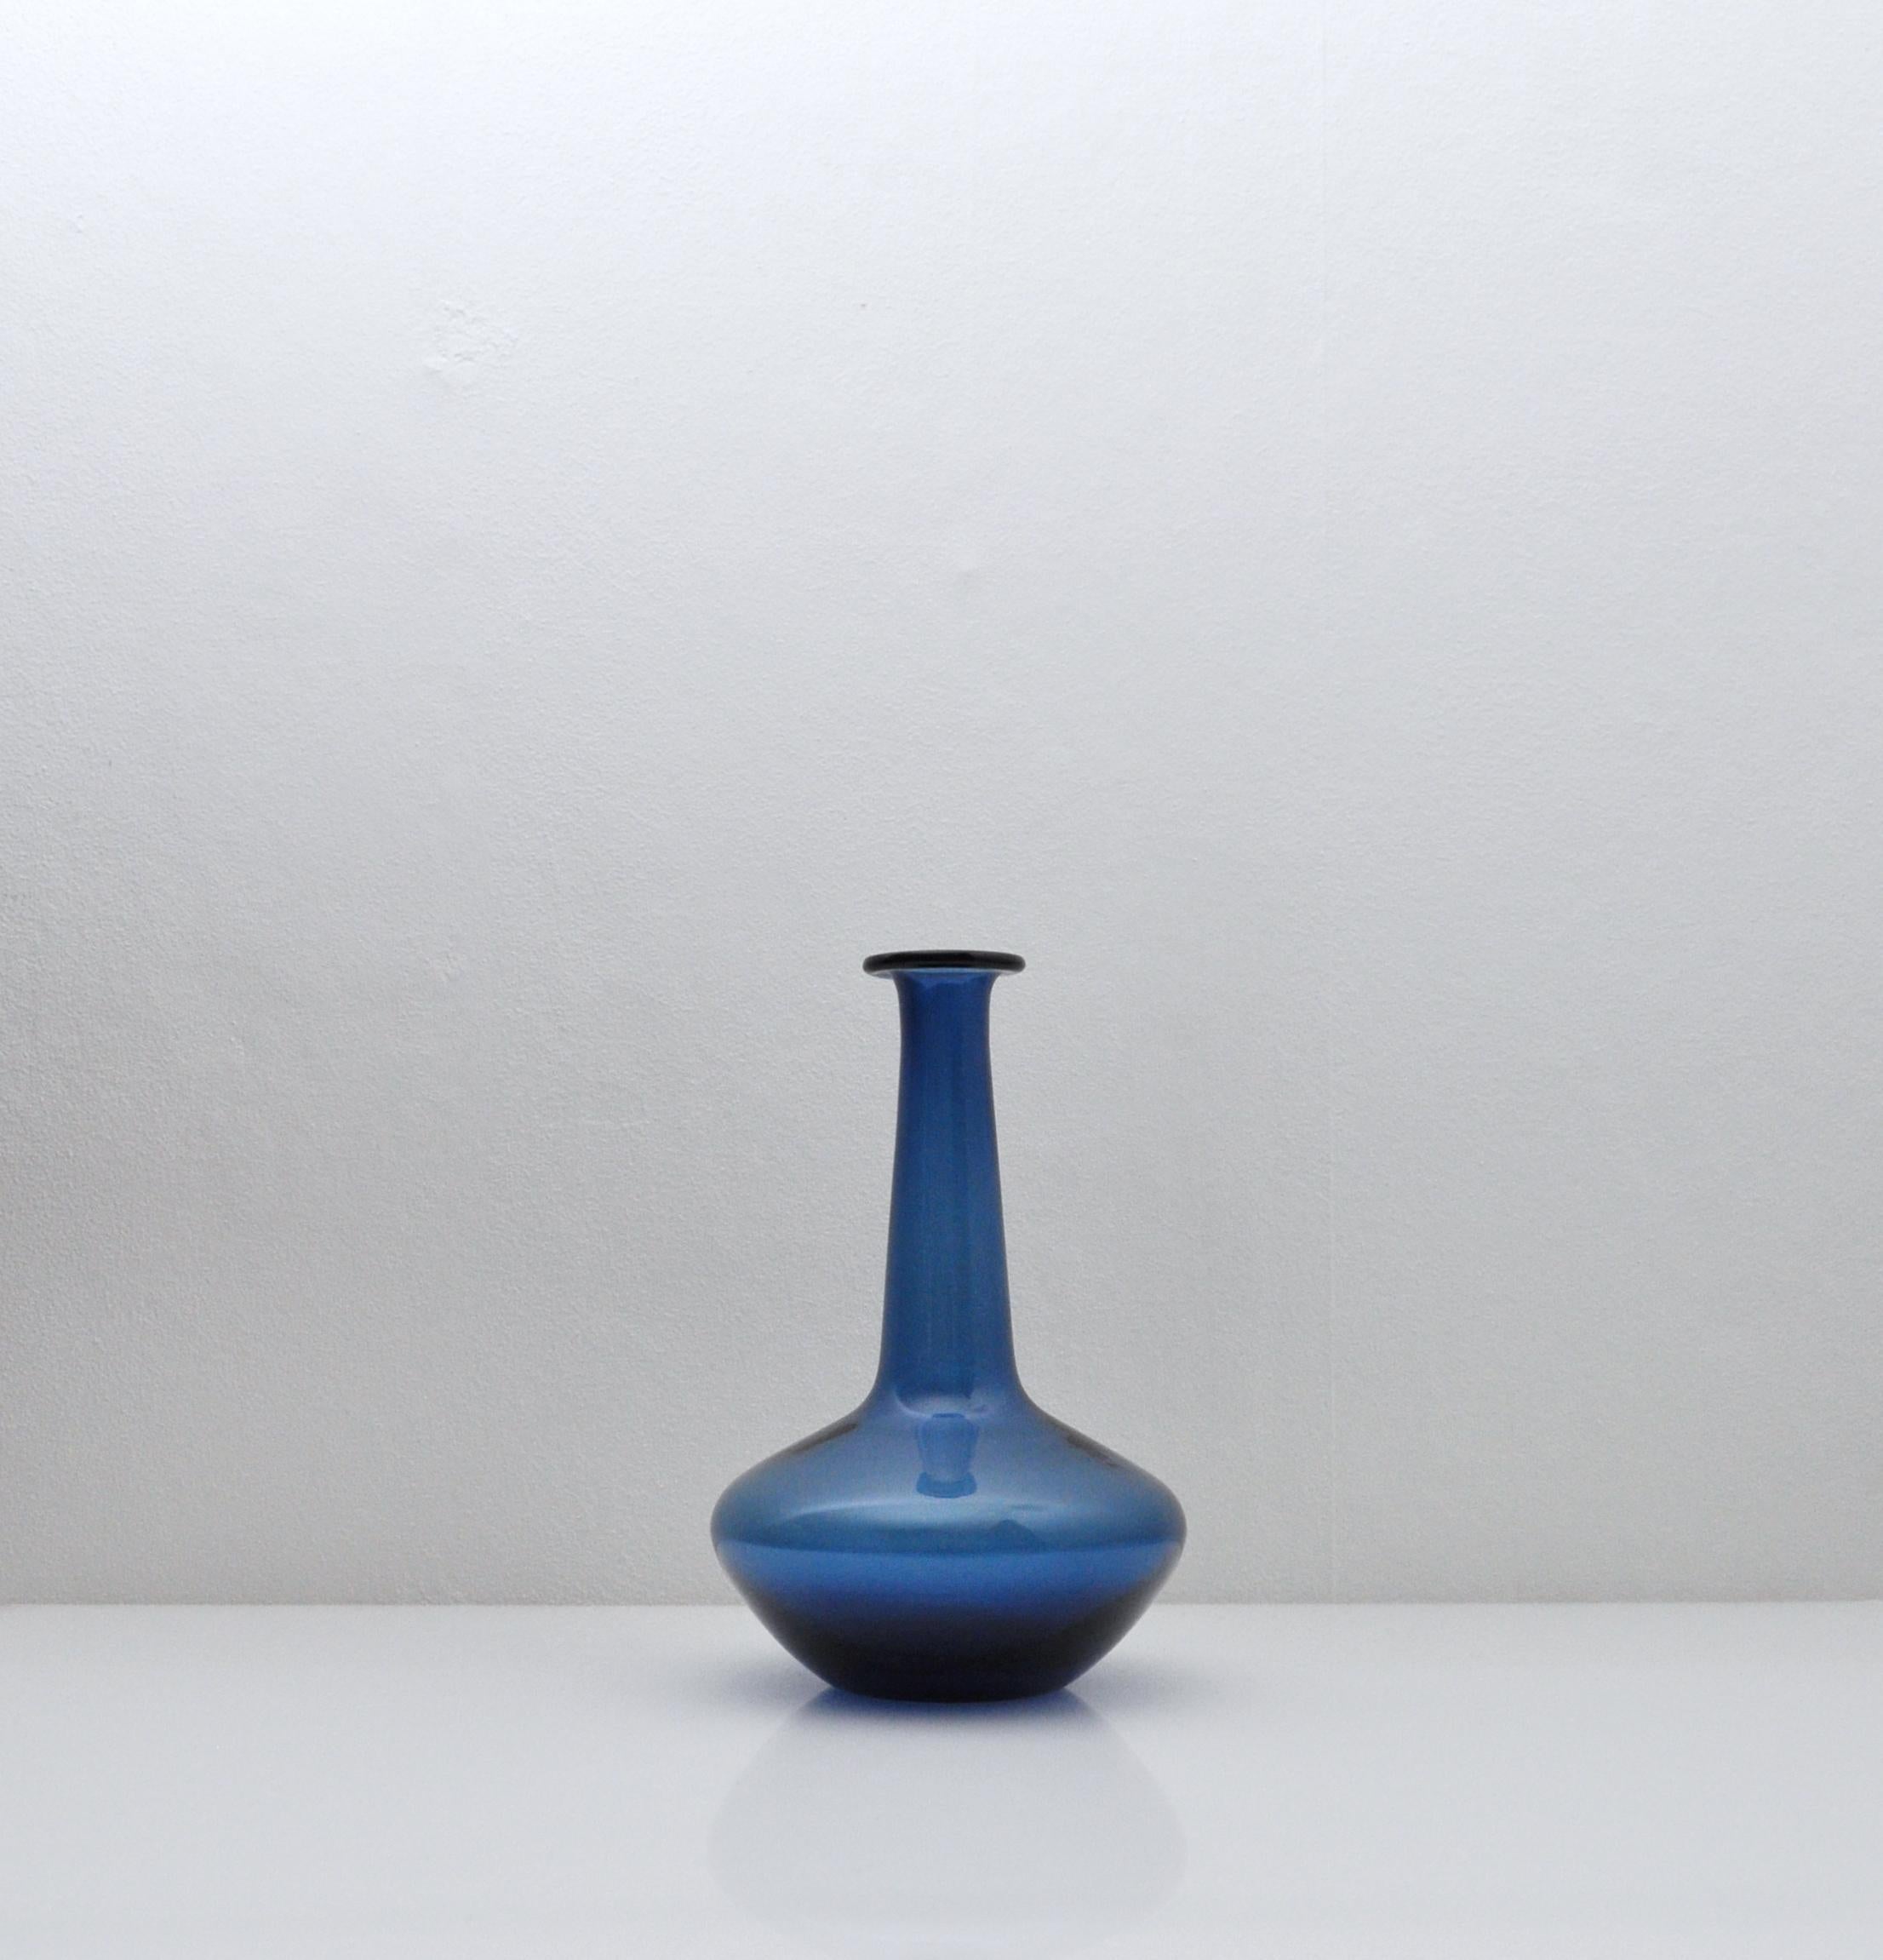 Vase from the series 